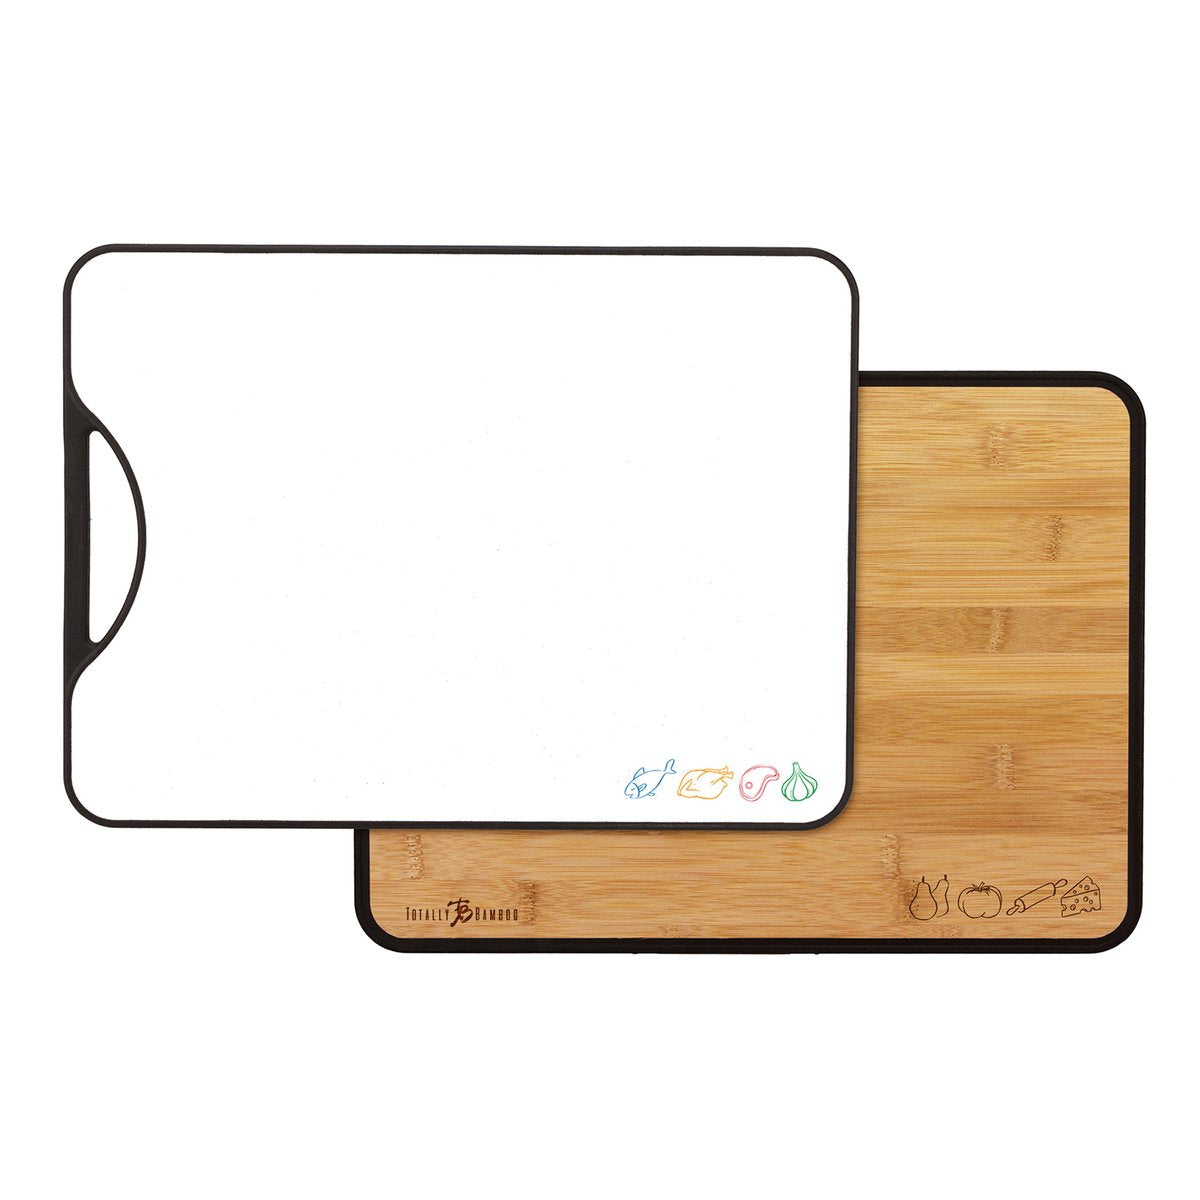 front and back view of cutting board on white background.